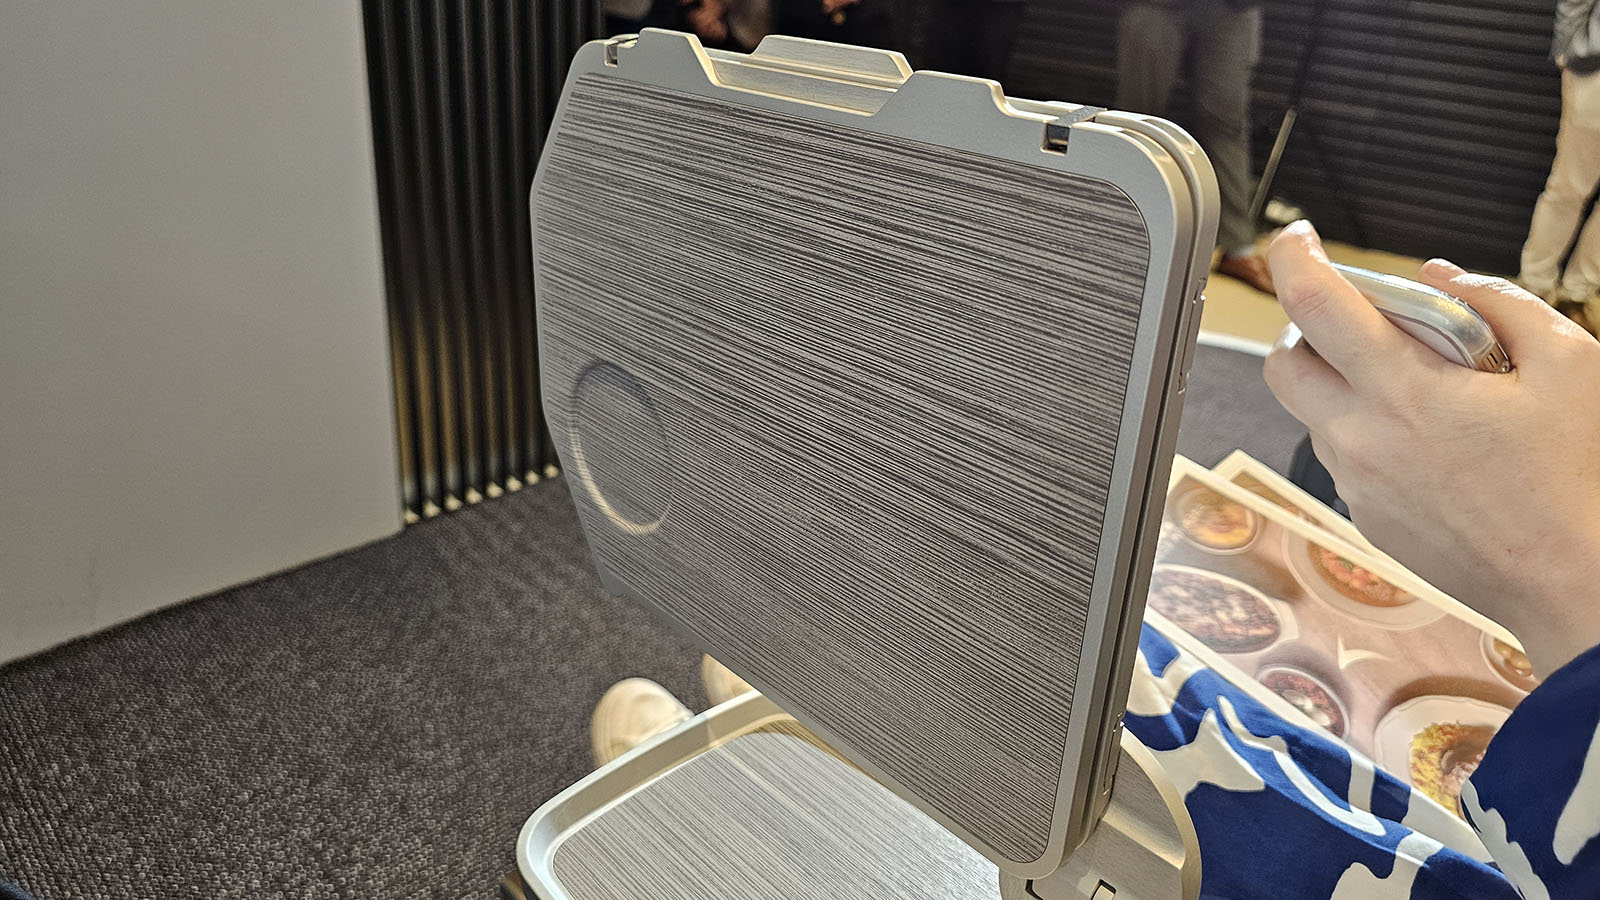 Meal tray deployed in Cathay Pacific's new Premium Economy